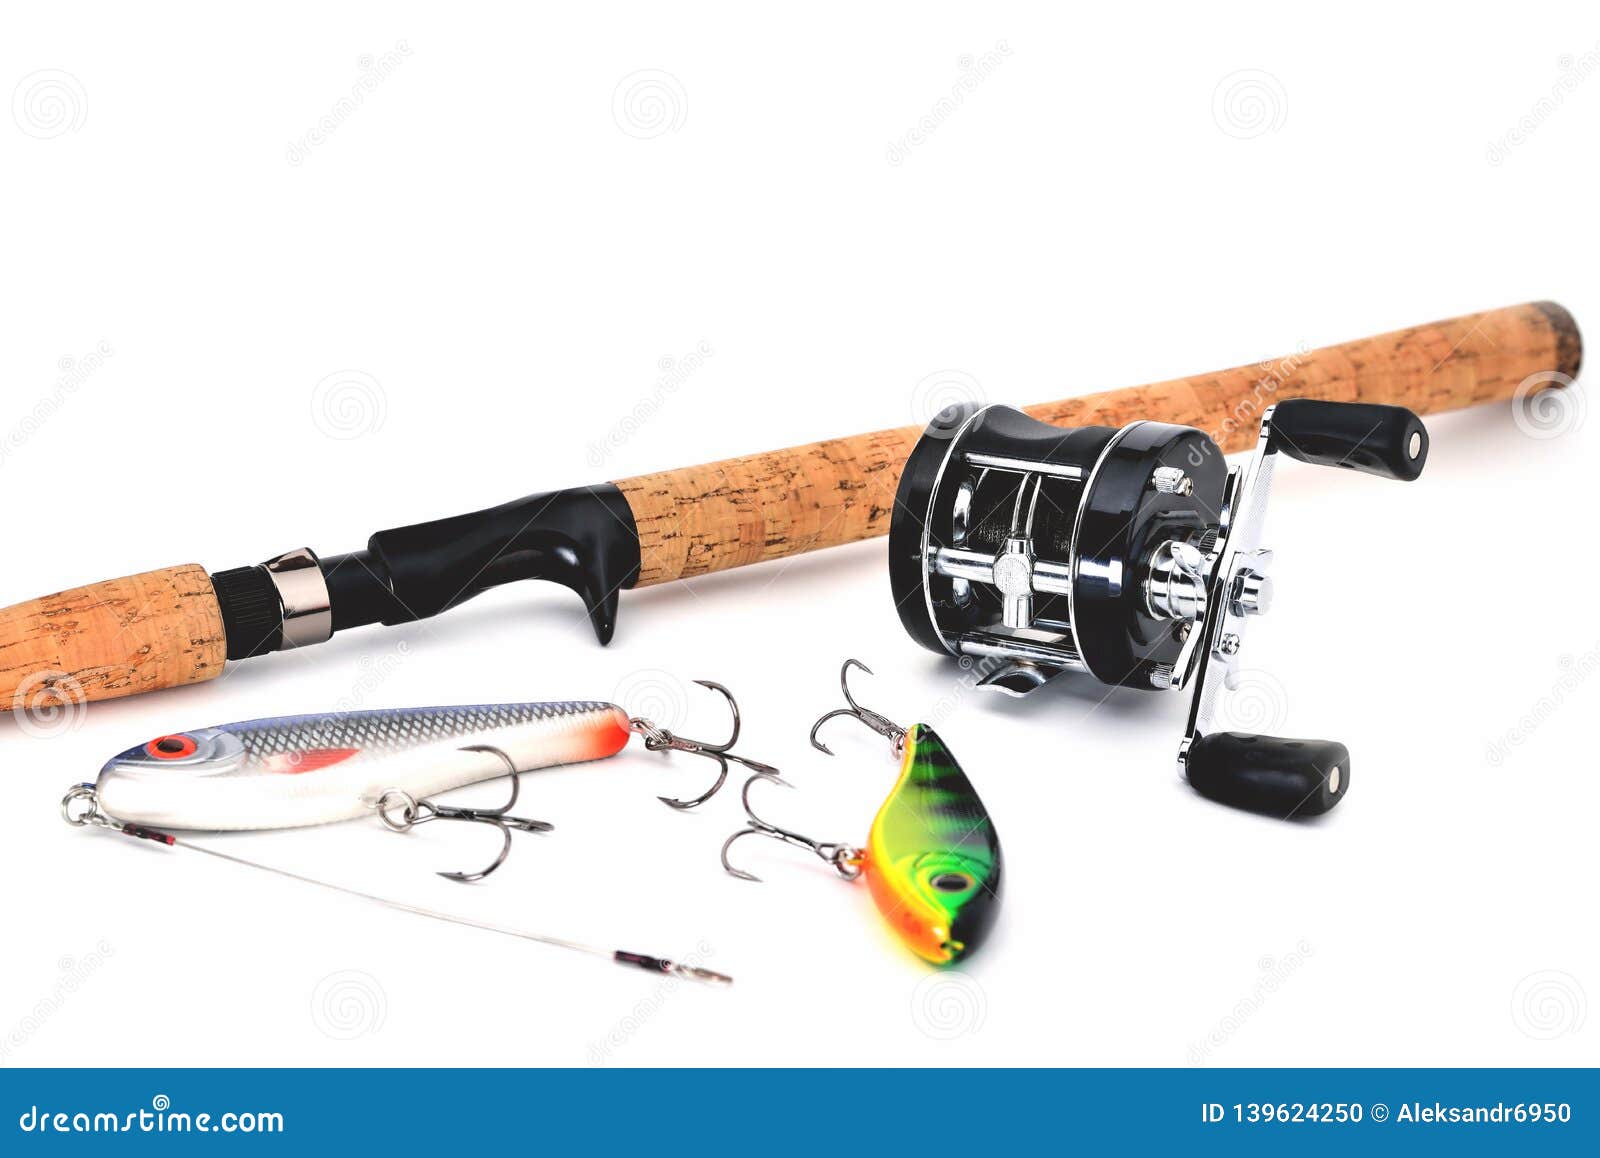 Jerkeys Spinning and Multiplier Reel for Fishing on a White Background  Close-up Stock Photo - Image of wobbler, hobby: 139624250